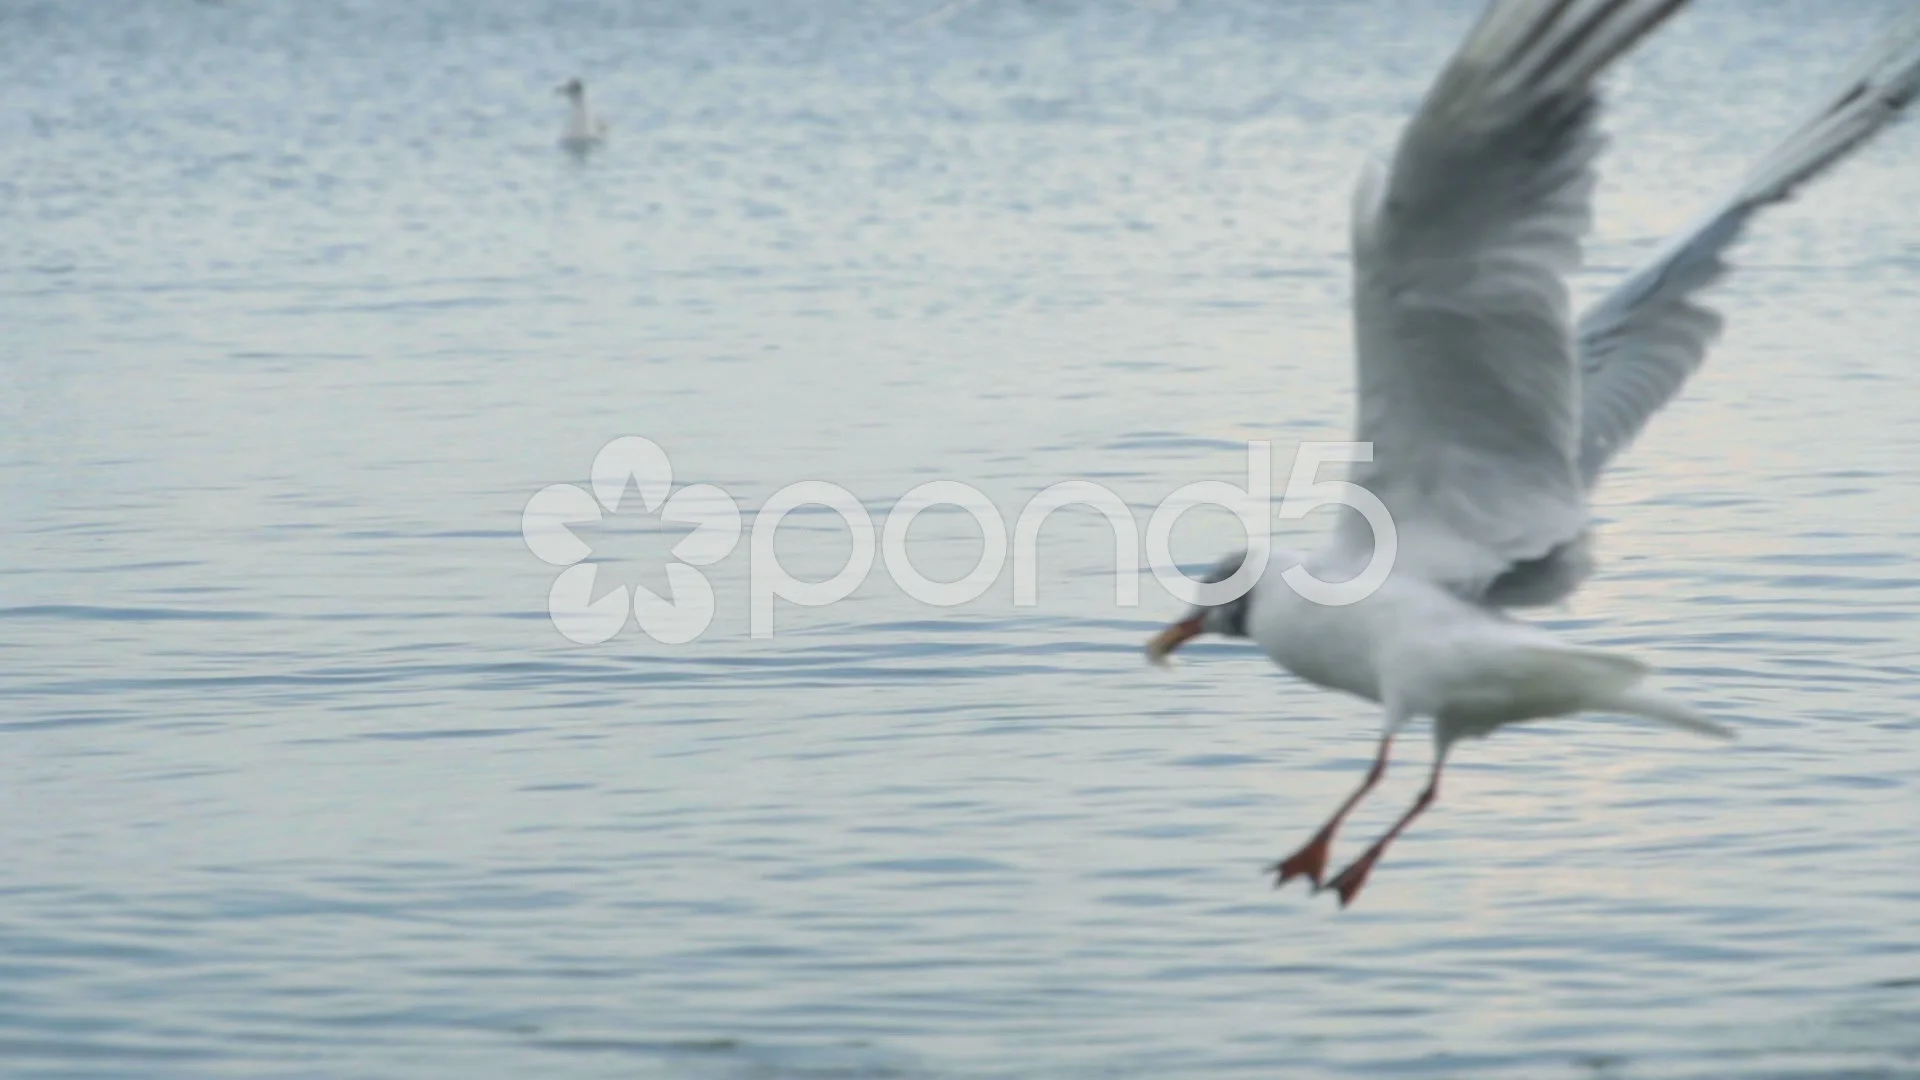 Seagull Flying Over The Sea, Wild Birds Photo #76885 Stock, 58% OFF